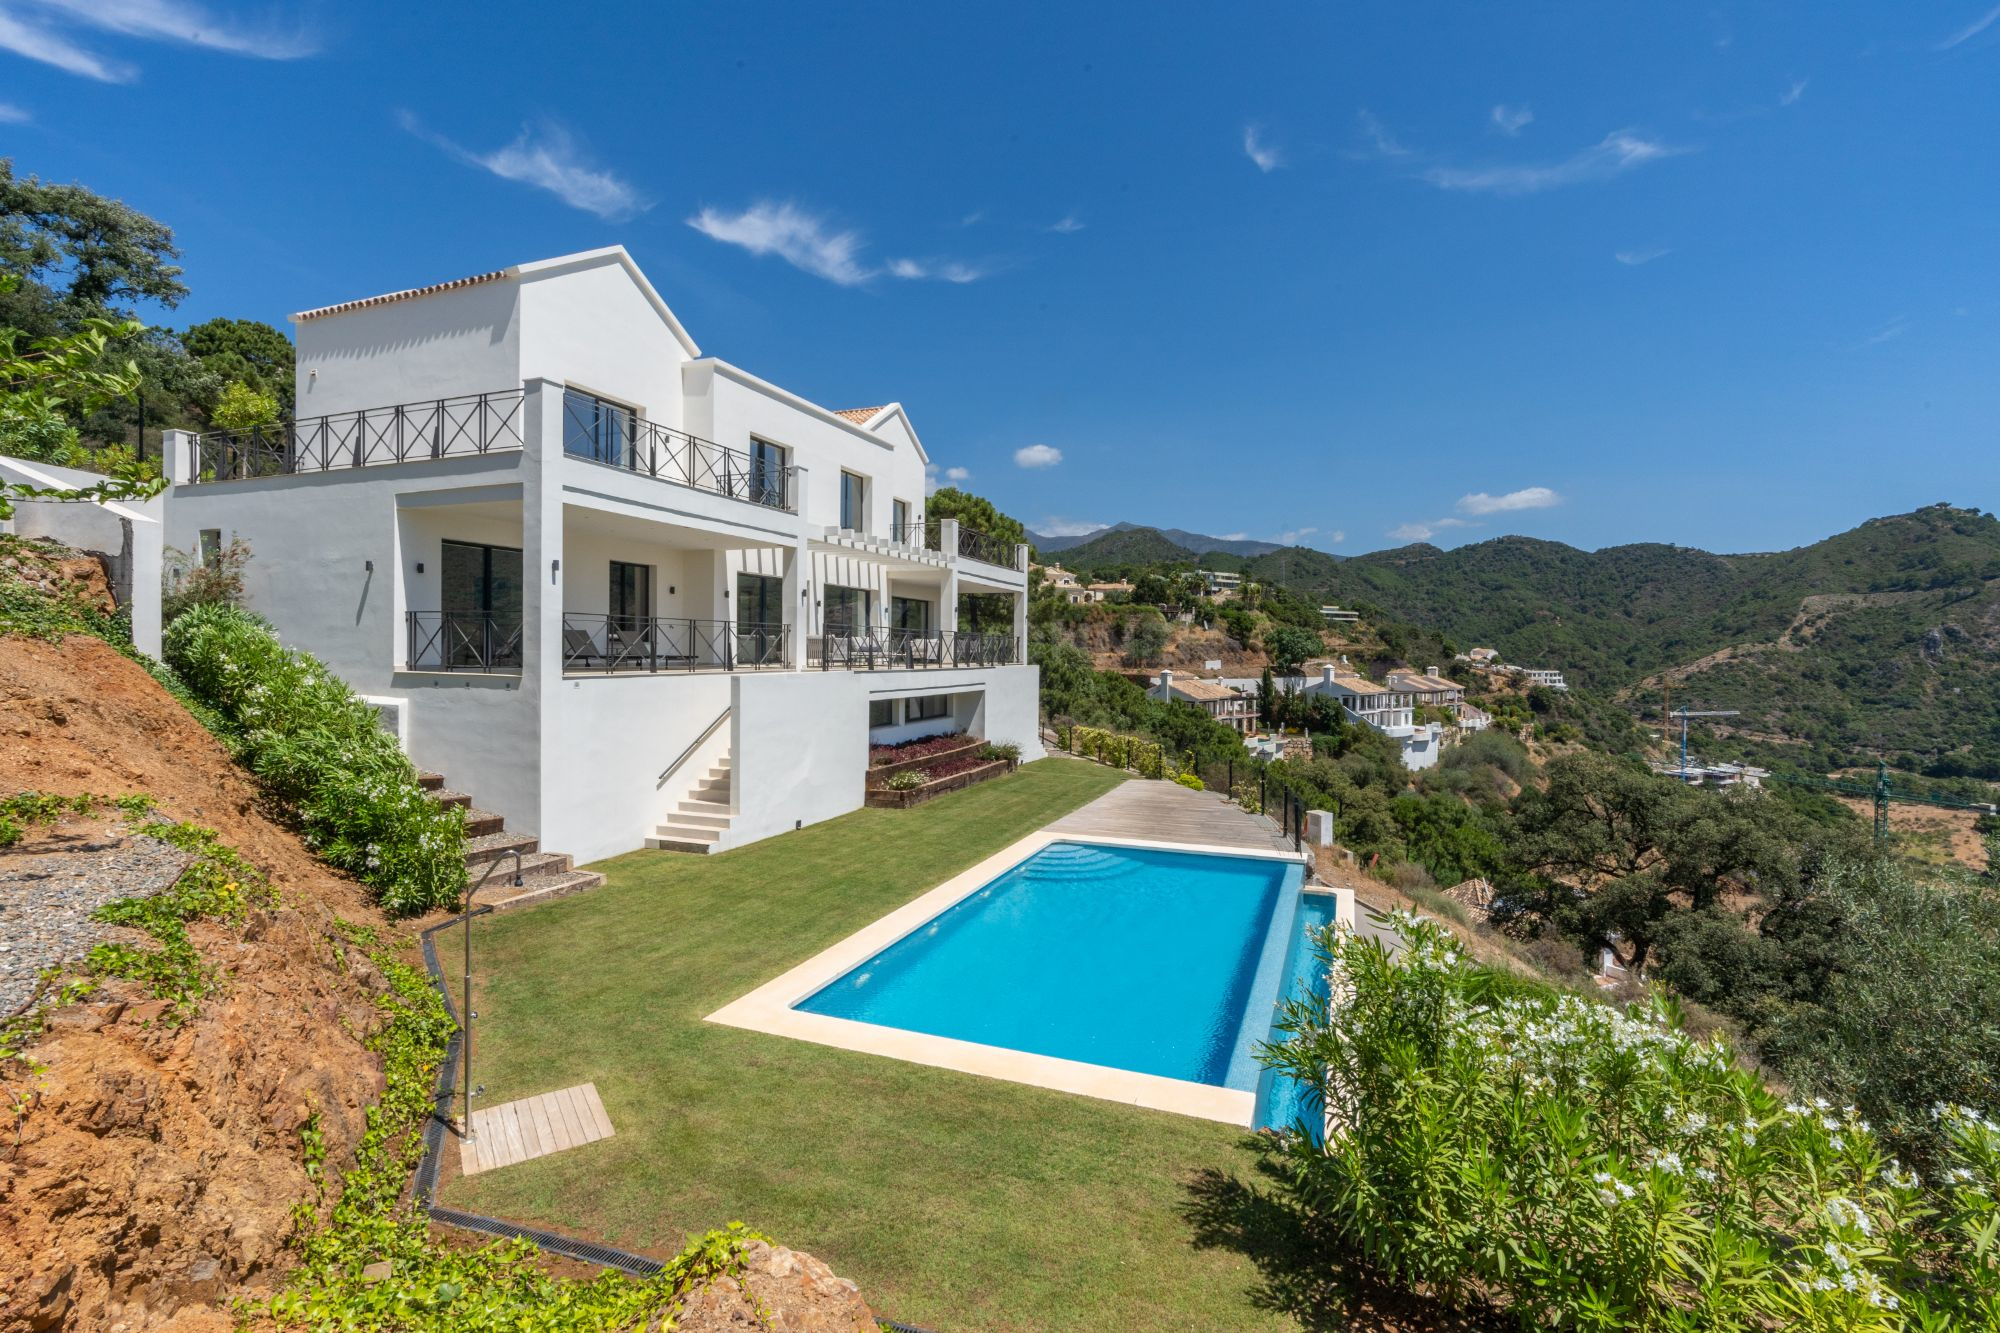 Contemporary Andalusian style villa with fantastic mountain and sea views